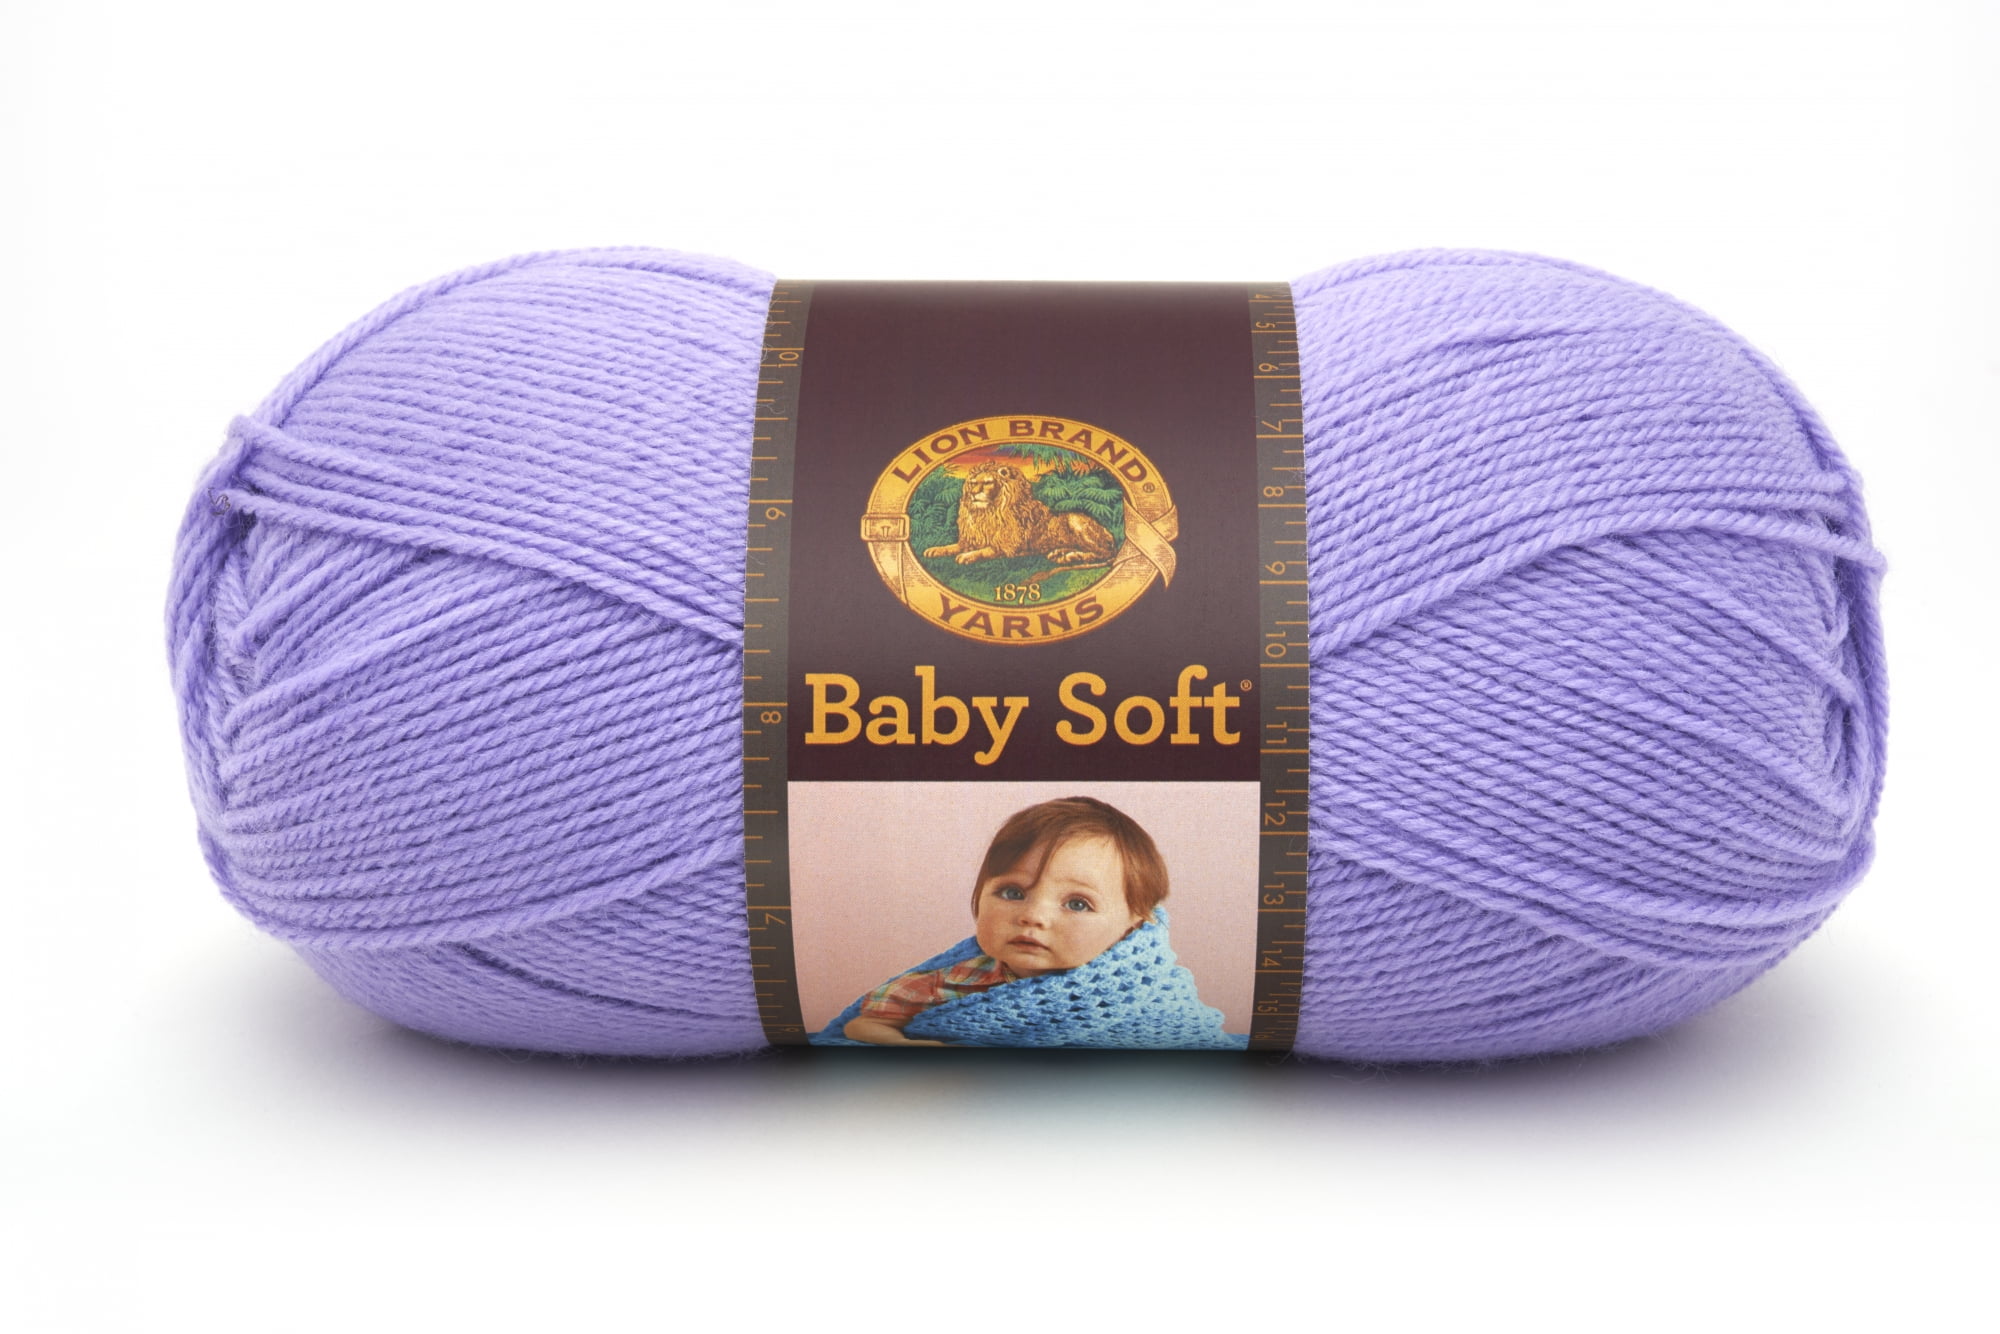 Lion BRAND Oh Baby Yarn Olive 023032067025 for sale online